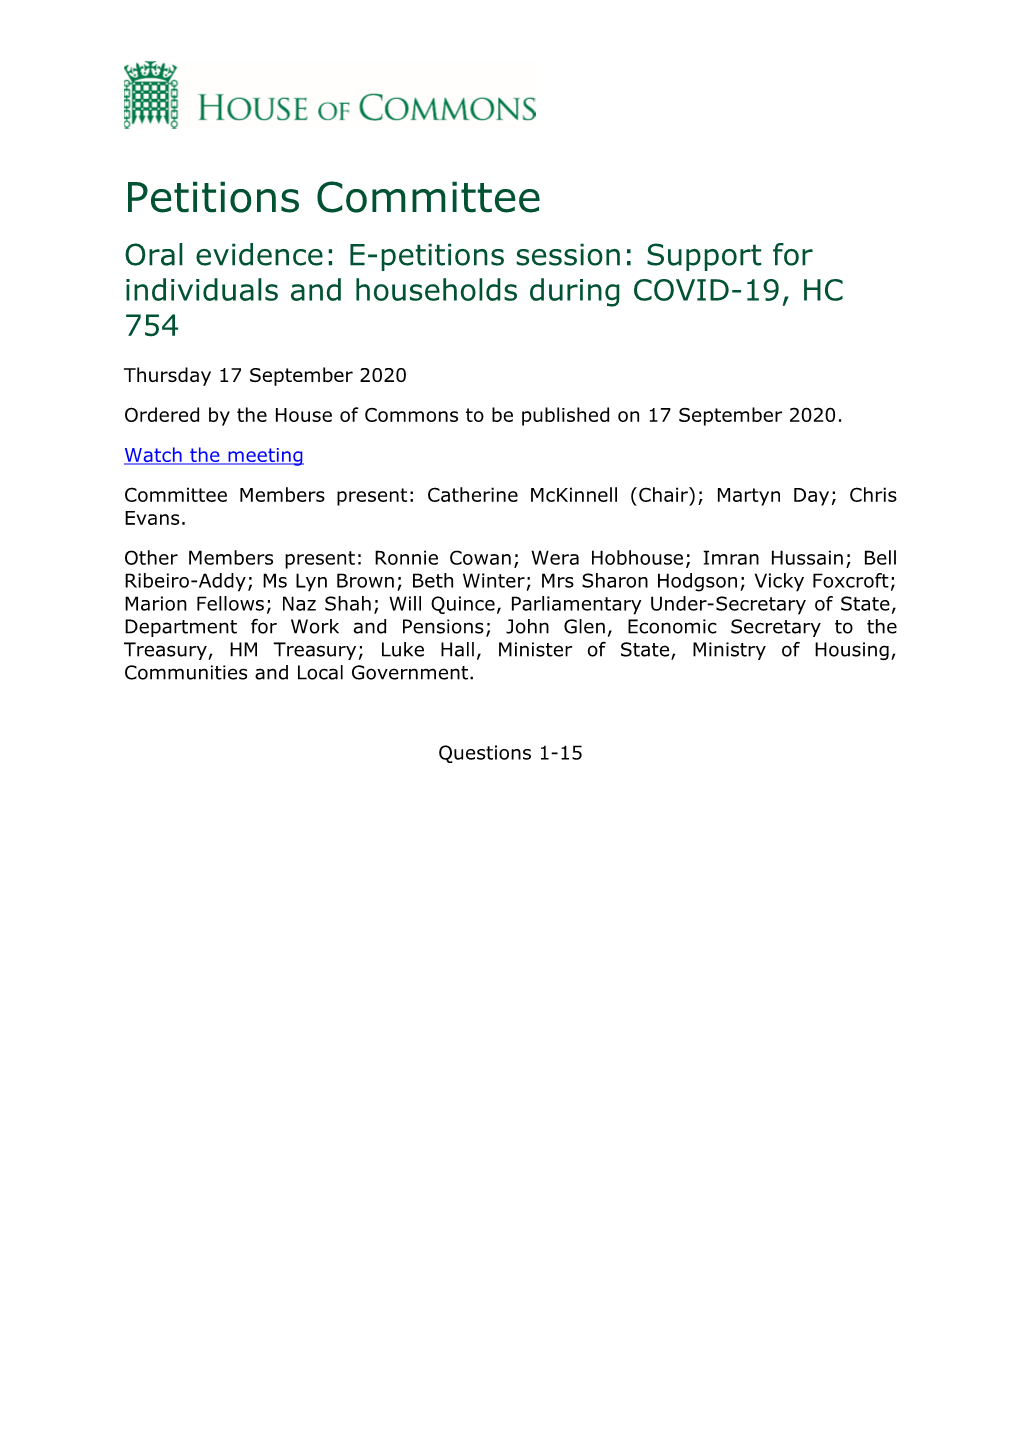 Petitions Committee Oral Evidence: E-Petitions Session: Support for Individuals and Households During COVID-19, HC 754